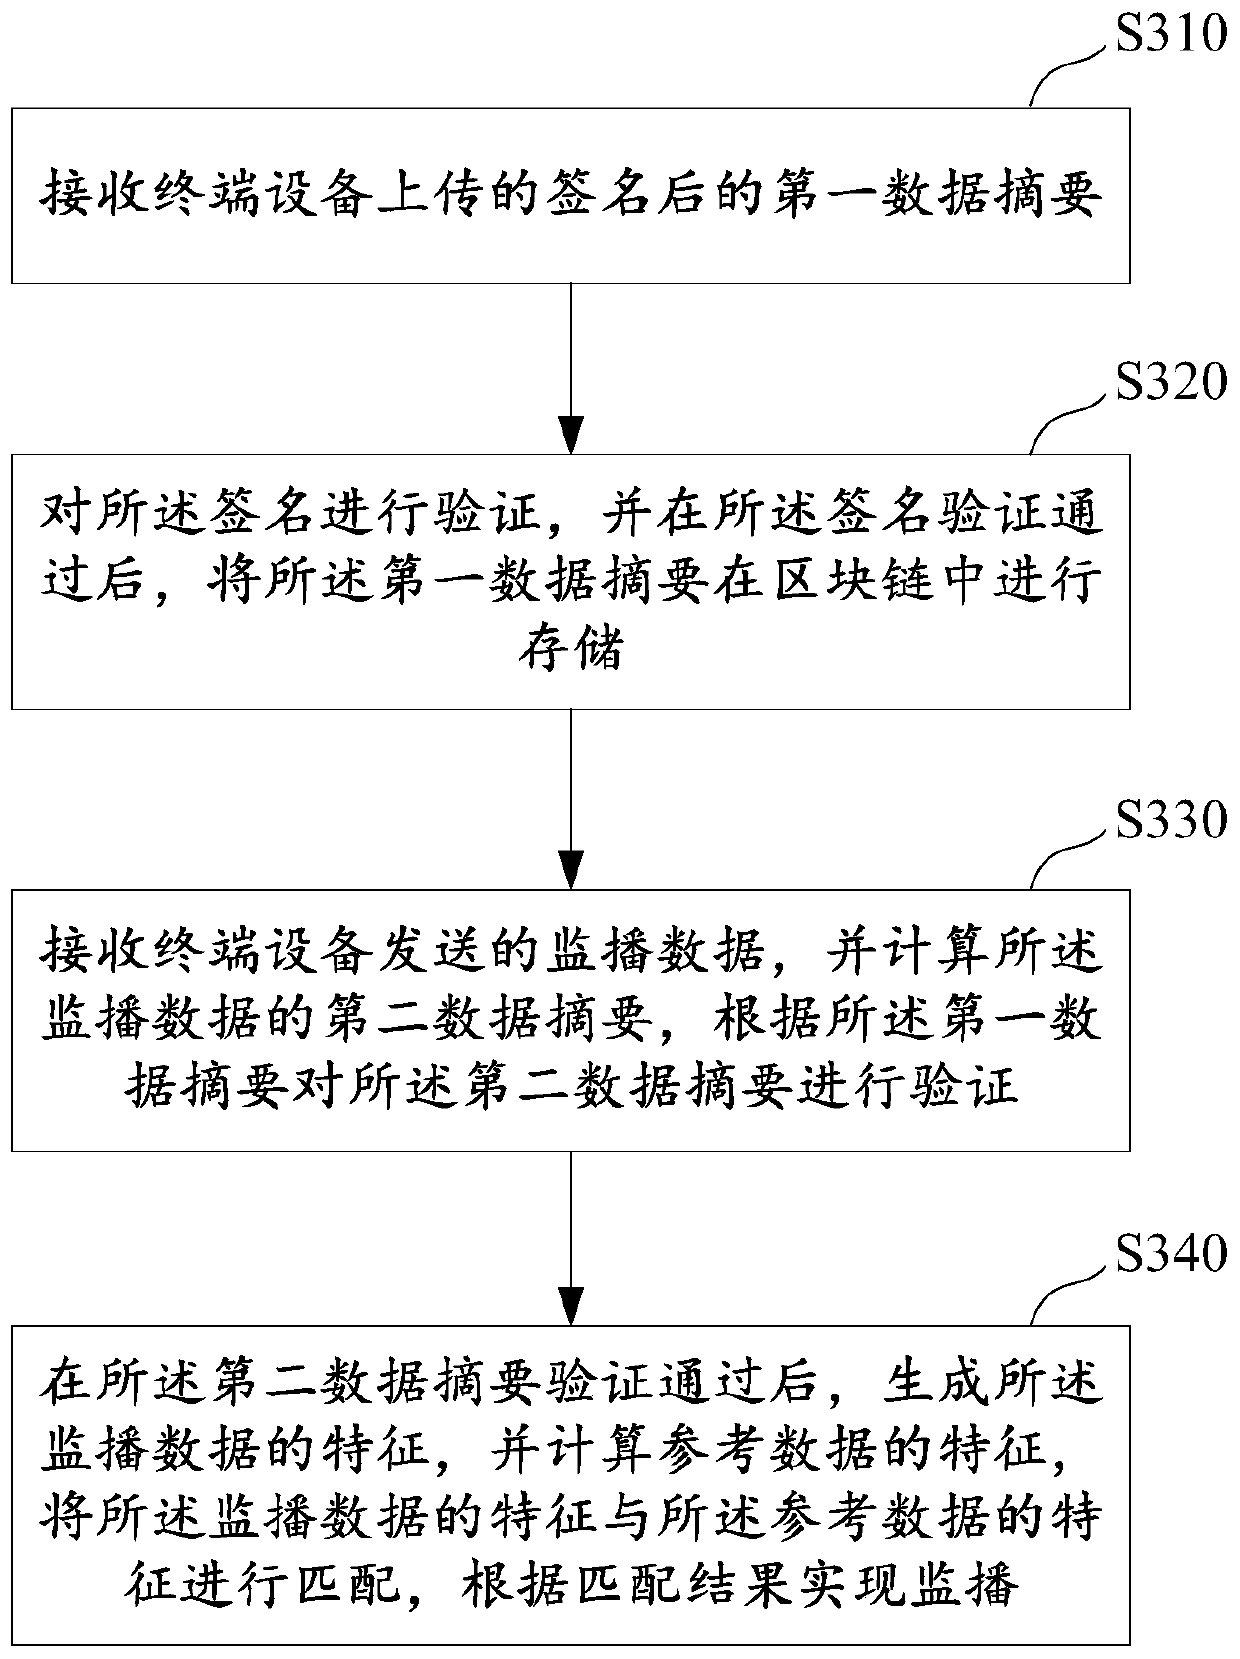 Block chain-based multimedia information monitoring broadcast method, device and system